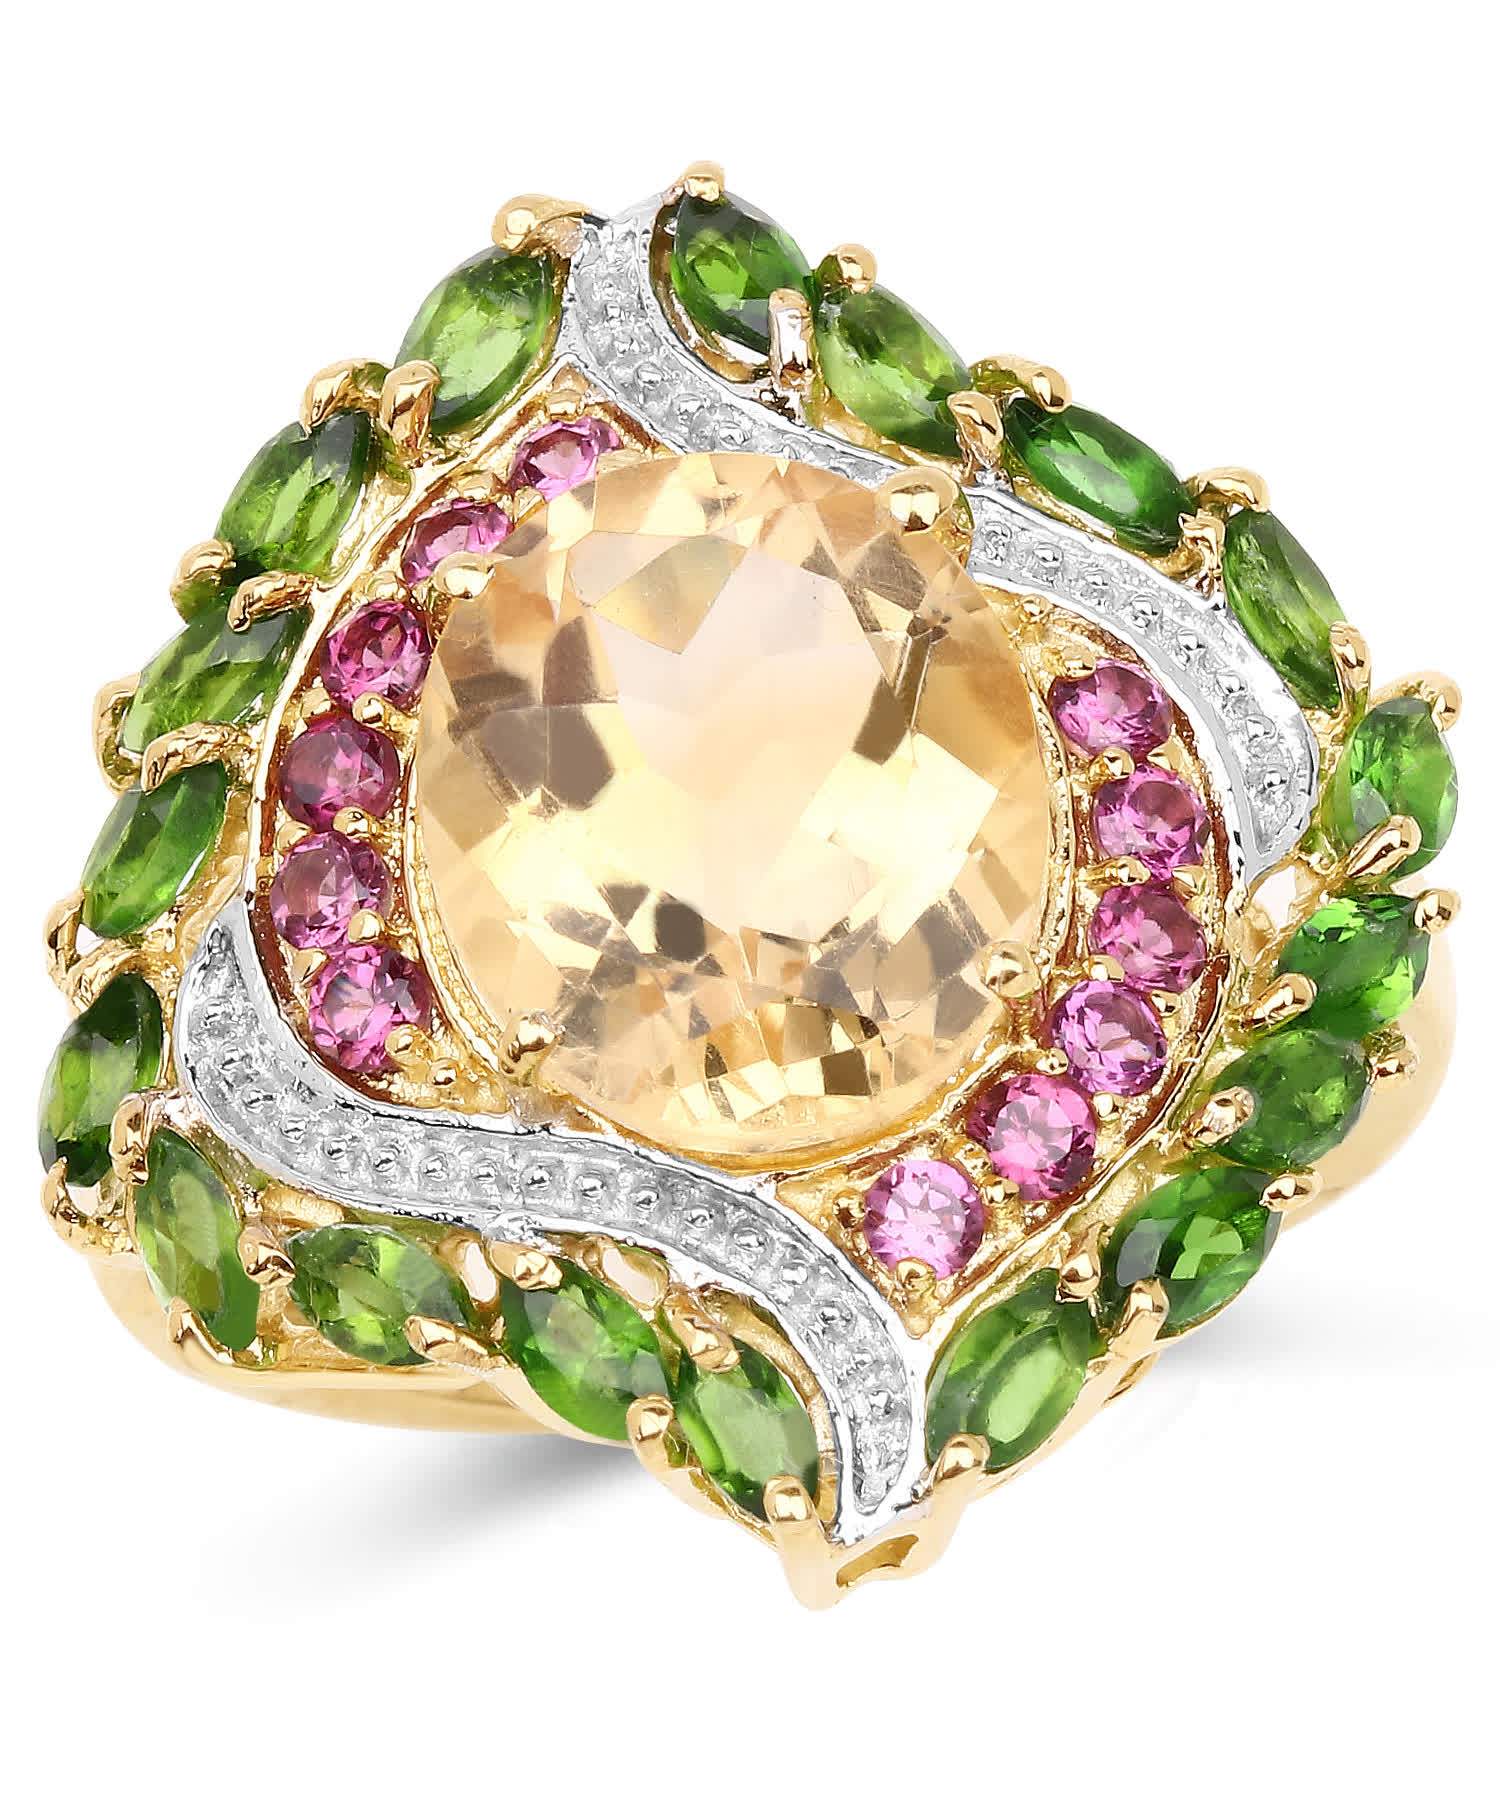 6.11ctw Natural Citrine, Rhodolite Garnet and Chrome Diopside 14k Gold Plated 925 Sterling Silver Cocktail Ring View 1